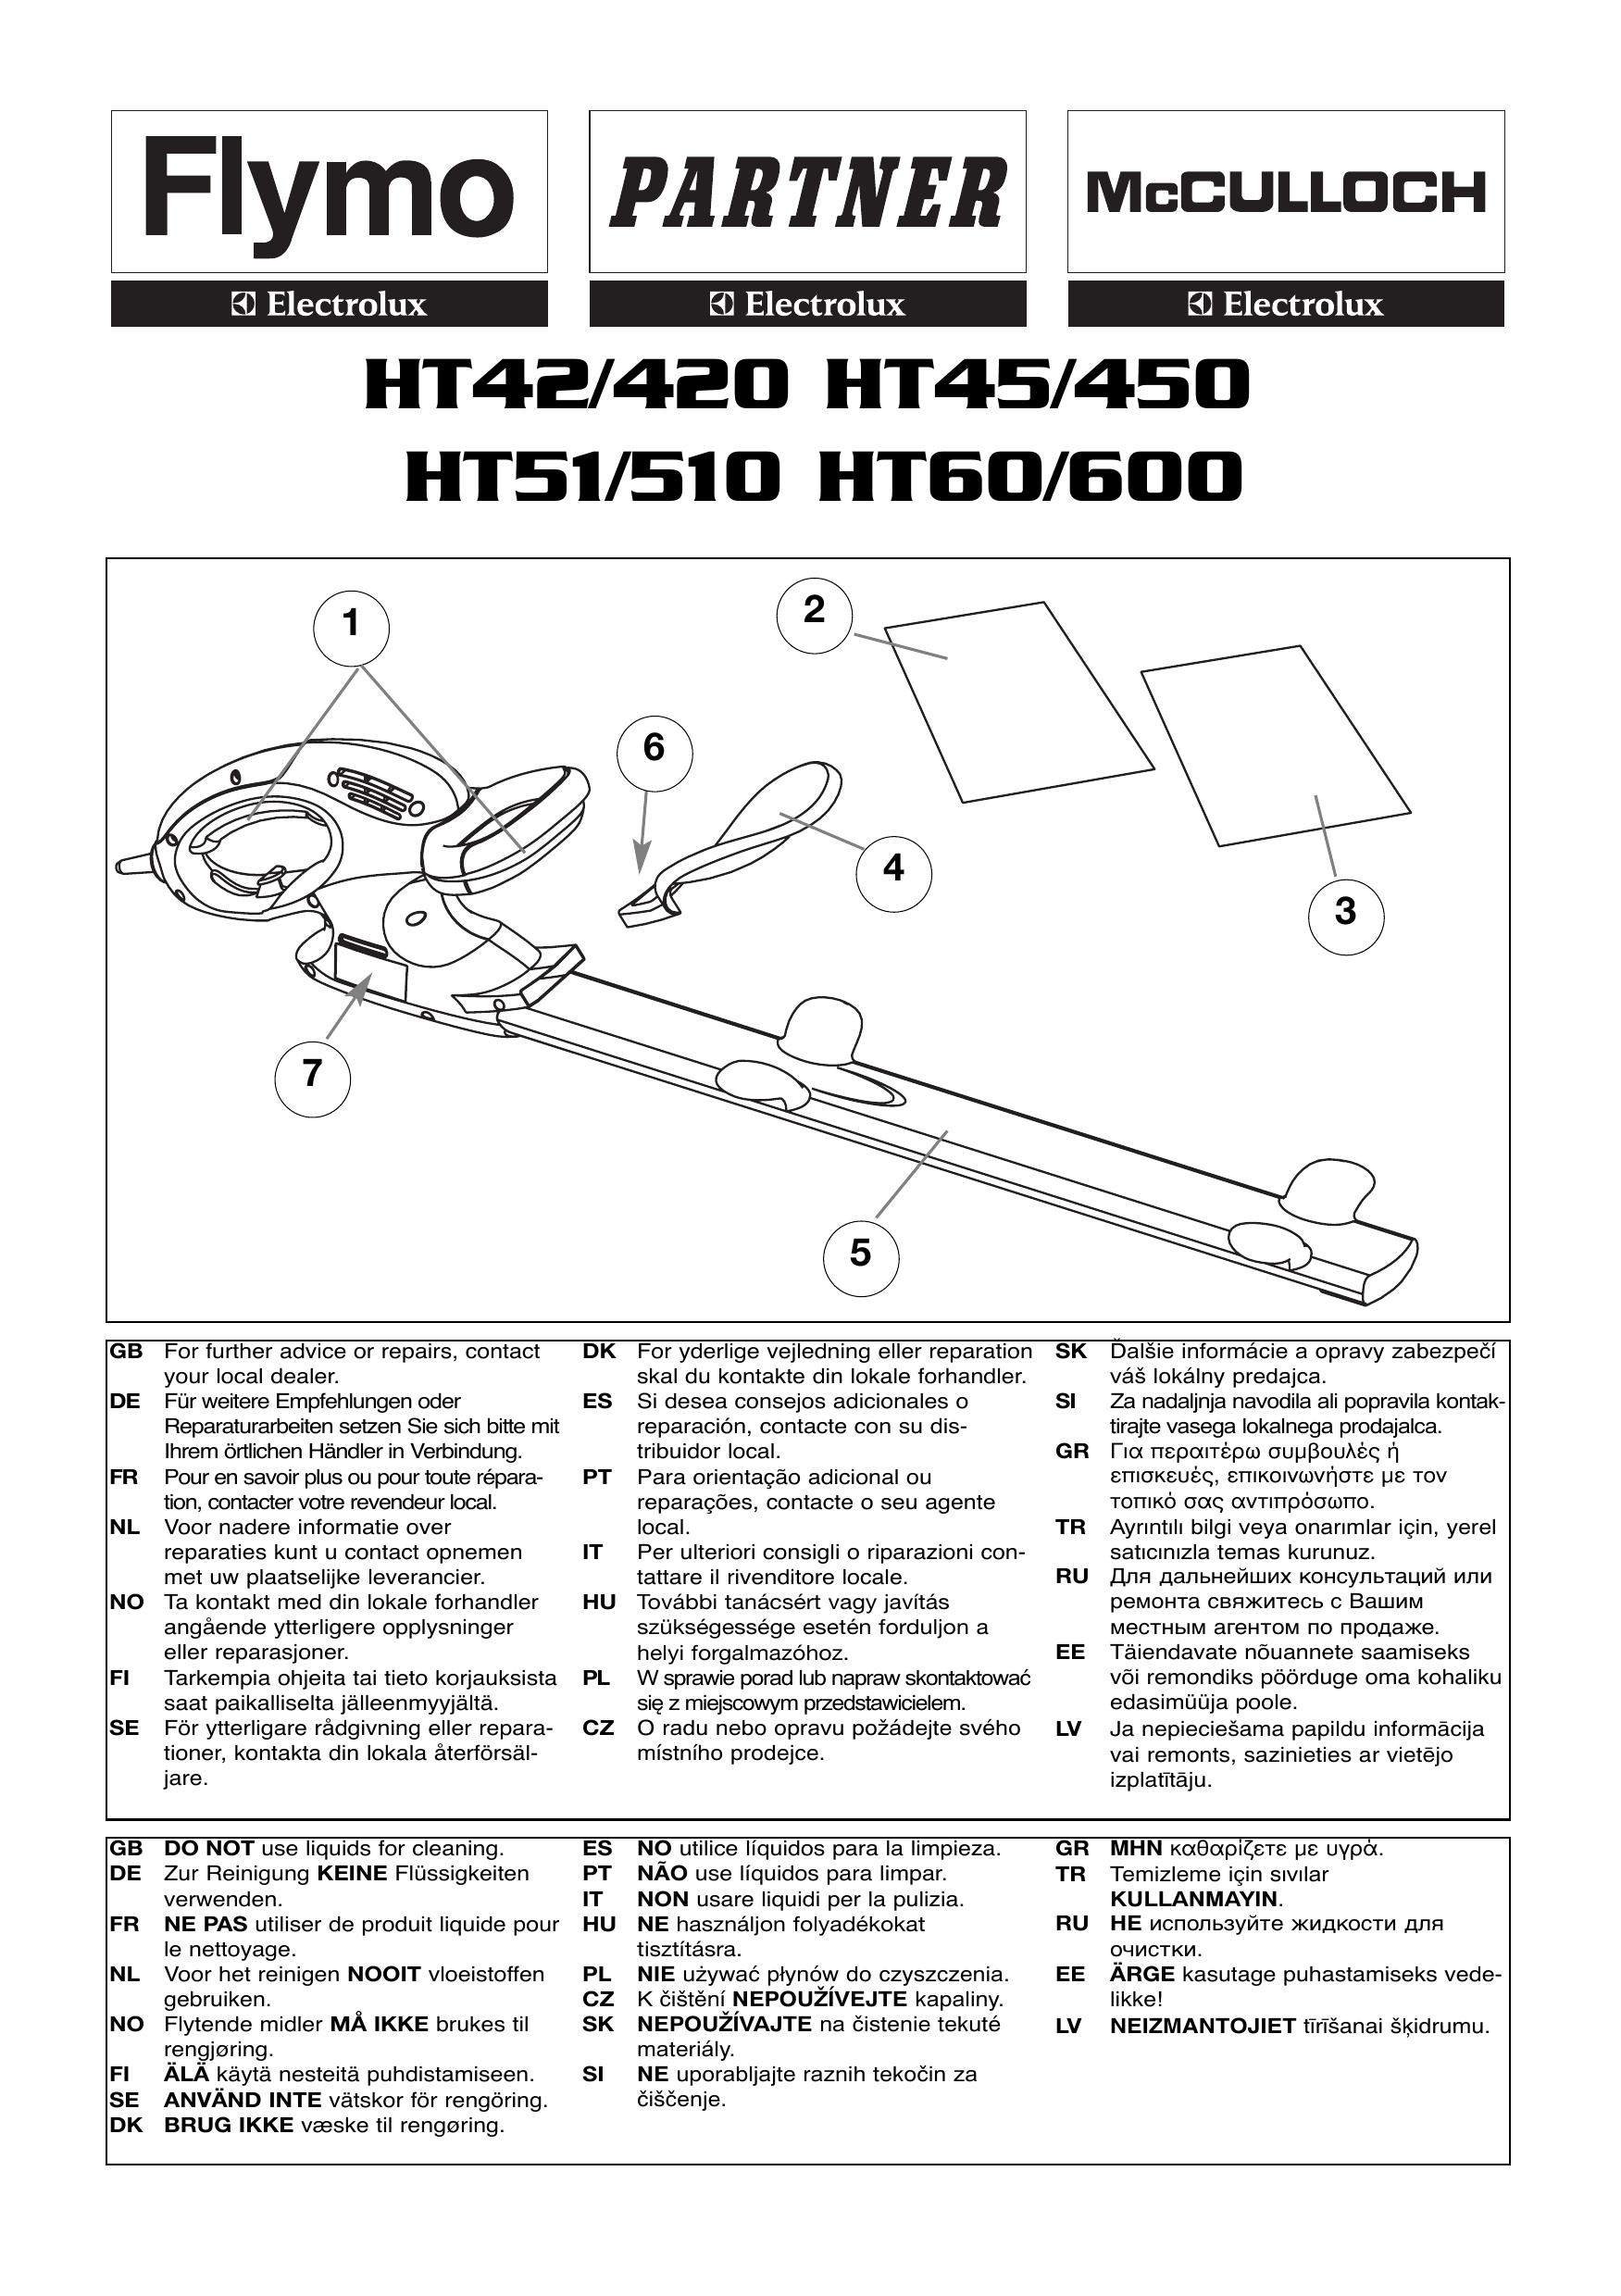 Flymo HT60/600 Trimmer User Manual